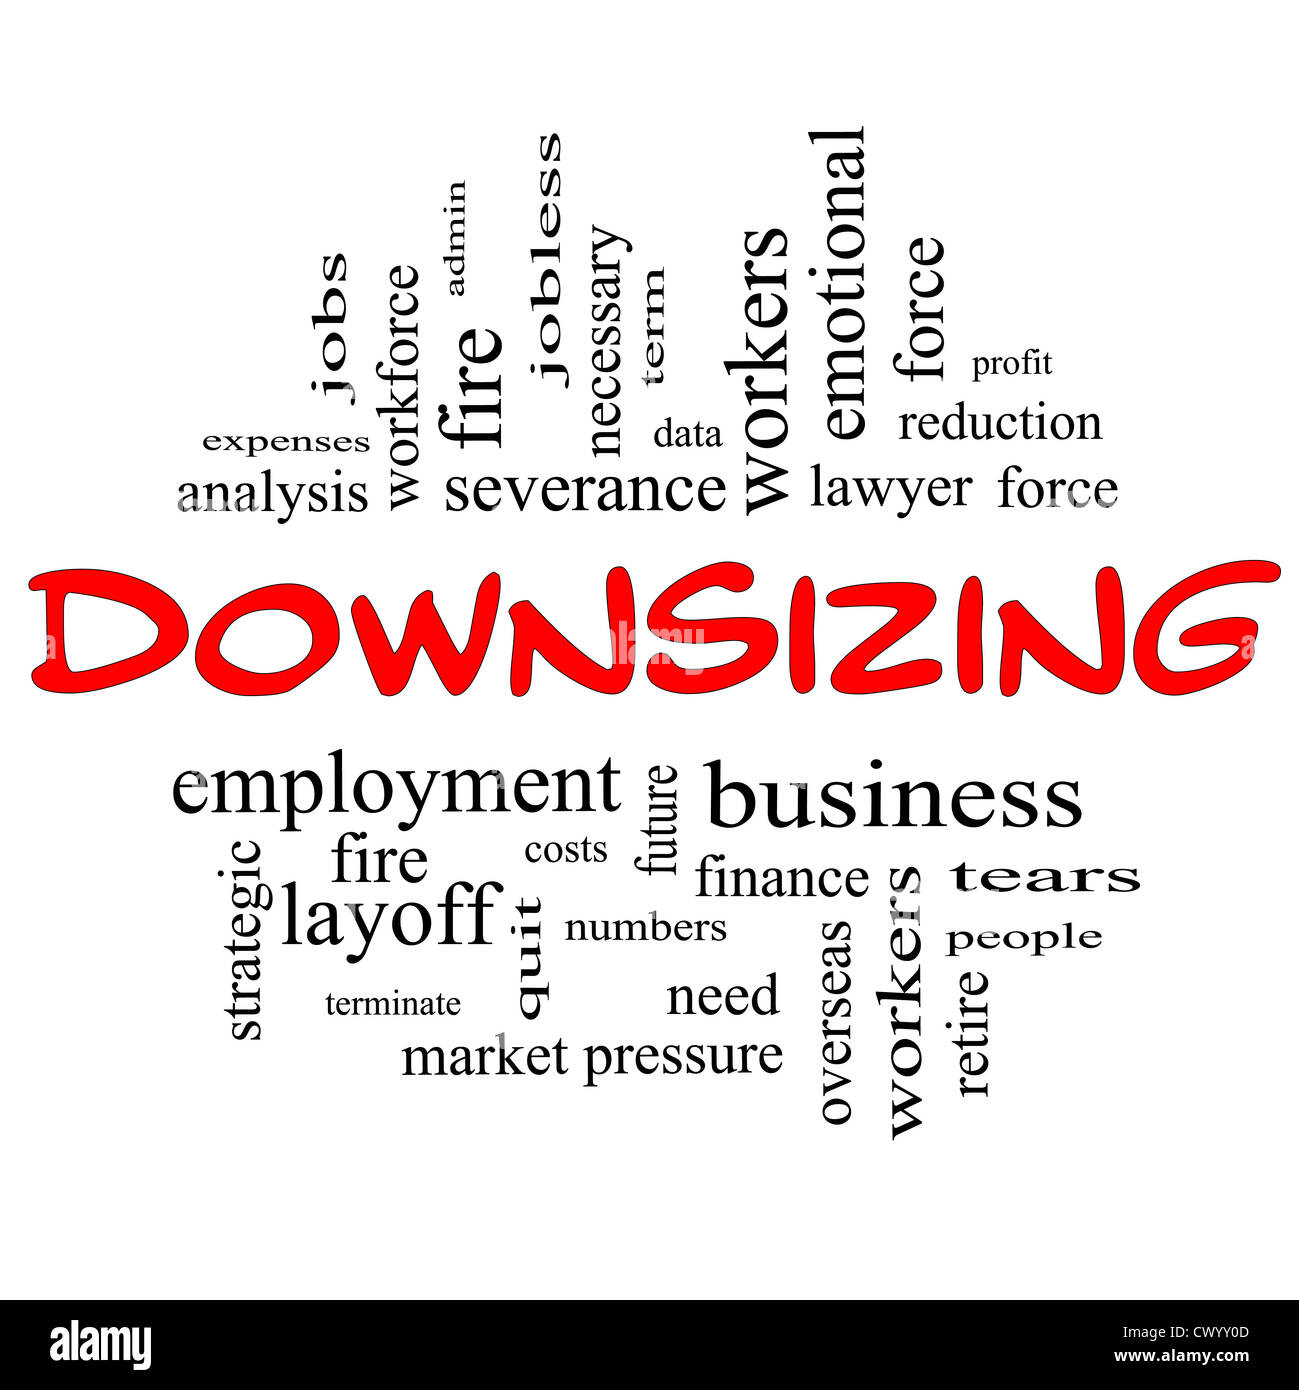 Downsizing Word Cloud Concept in red and black letters with great terms such as fire, layoff, terminate, severance and more. Stock Photo